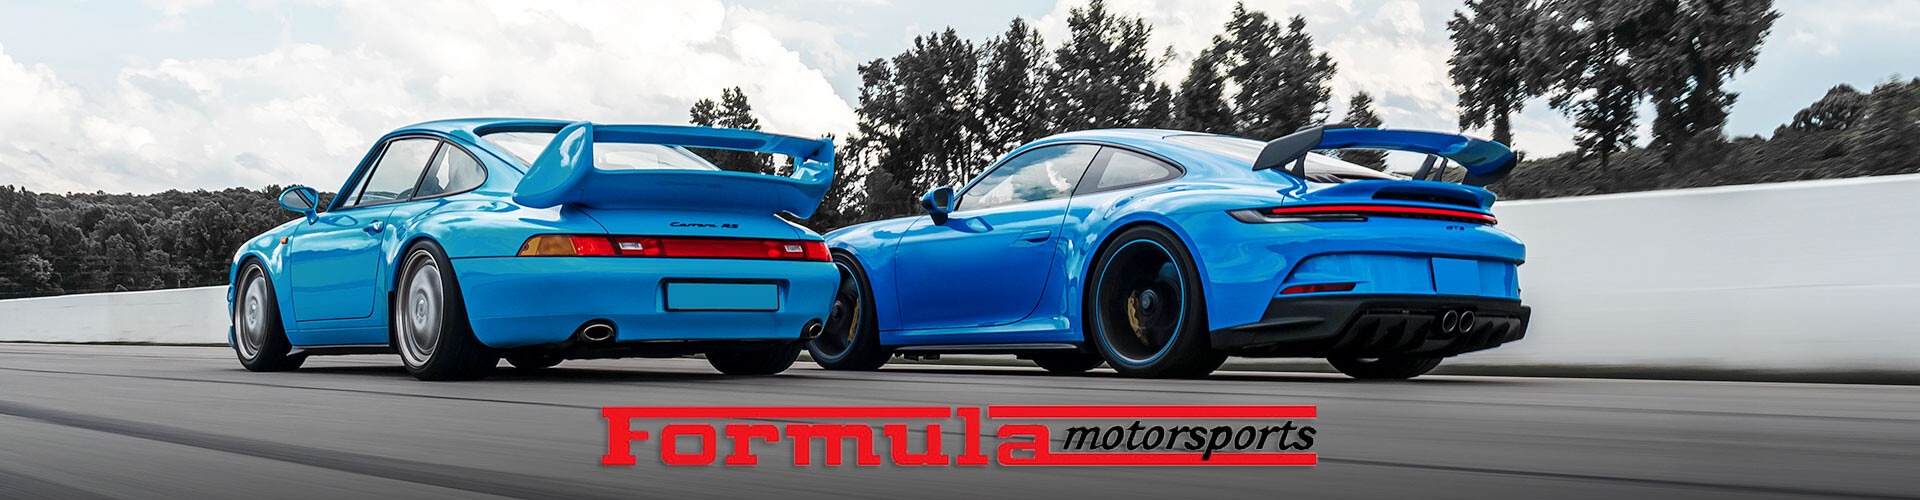 Porsche Repair in New York, NY by Formula Motorsports a leading Porsche repair specialist in New York specializing in Porsche repair, maintenance, restoration, auto body repair, performance tuning and service.